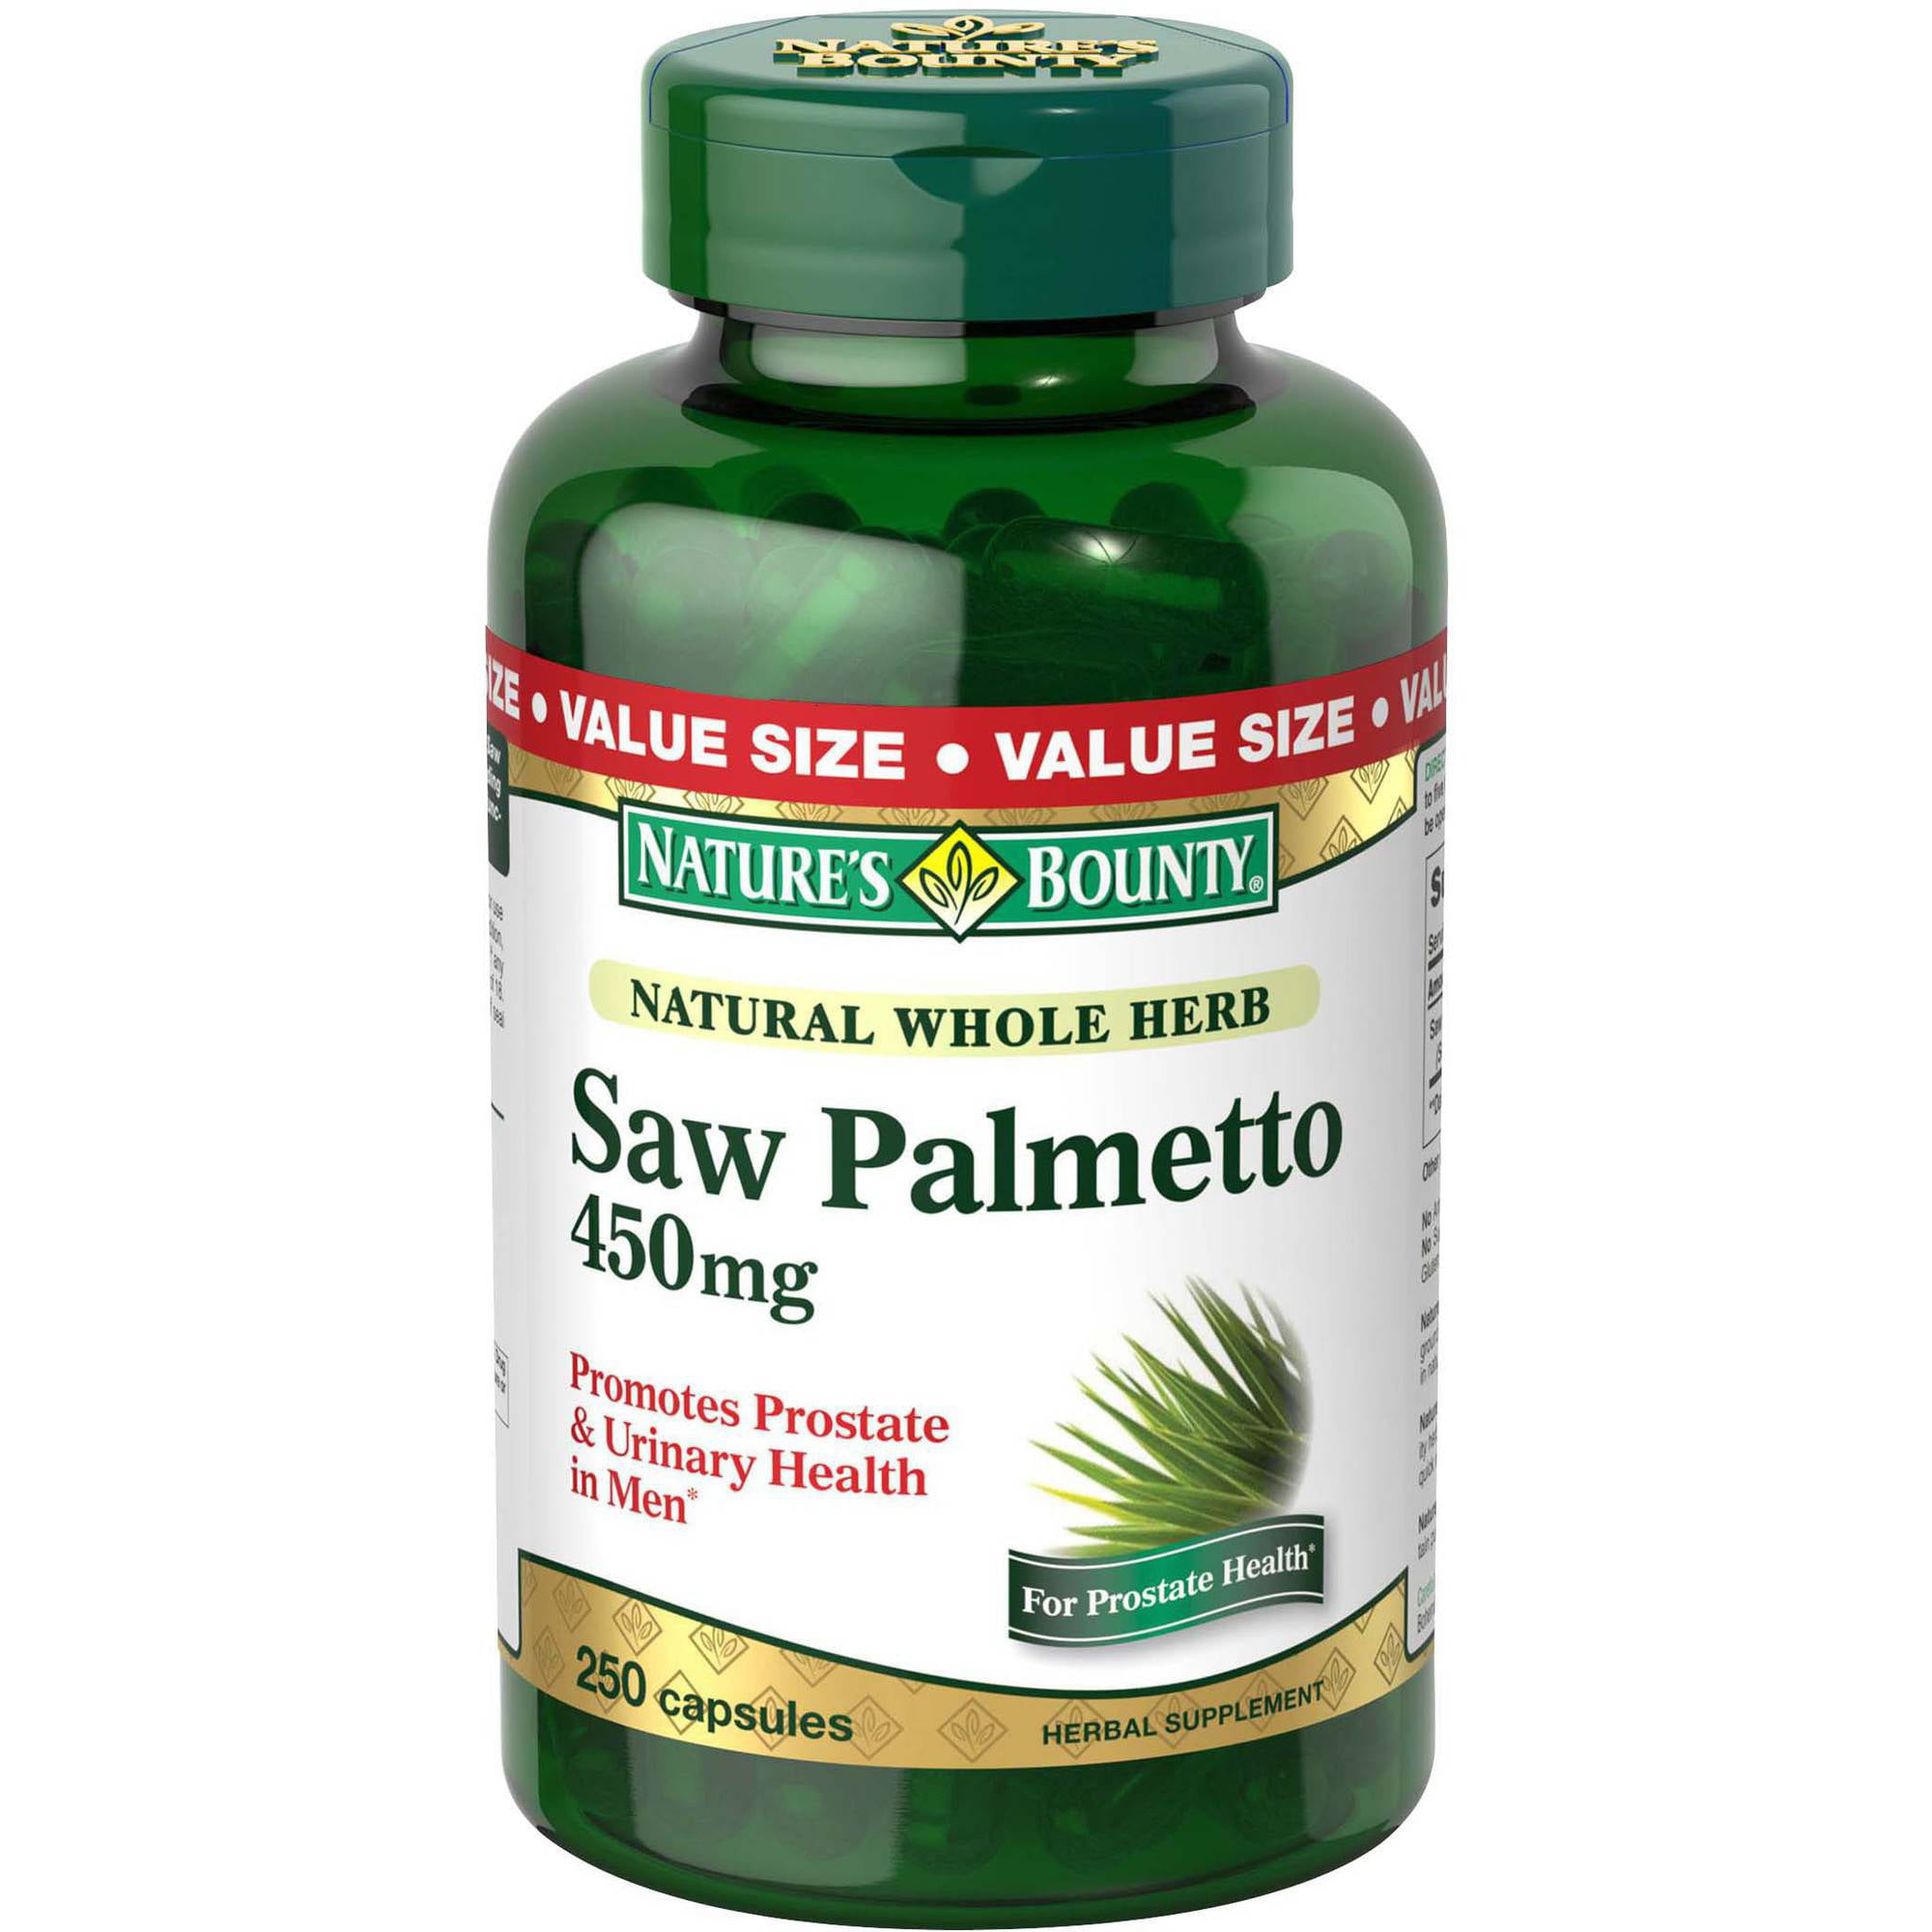 What are some saw palmetto benefits for women?